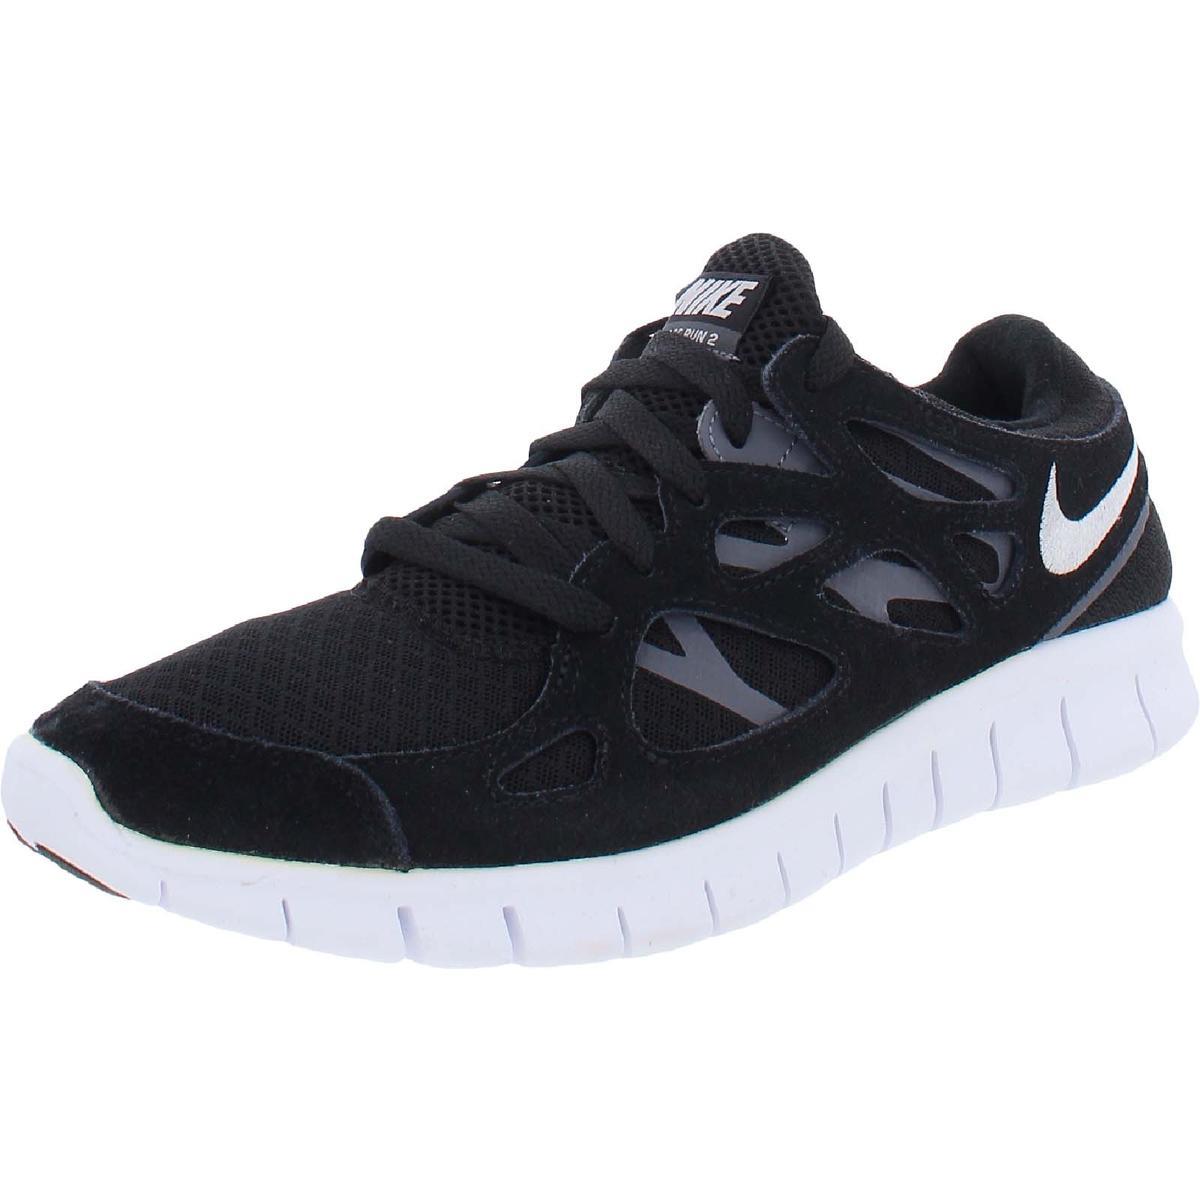 Nike Mens Suede Fitness Trainers Running Shoes Sneakers Bhfo 9387 Black/Grey